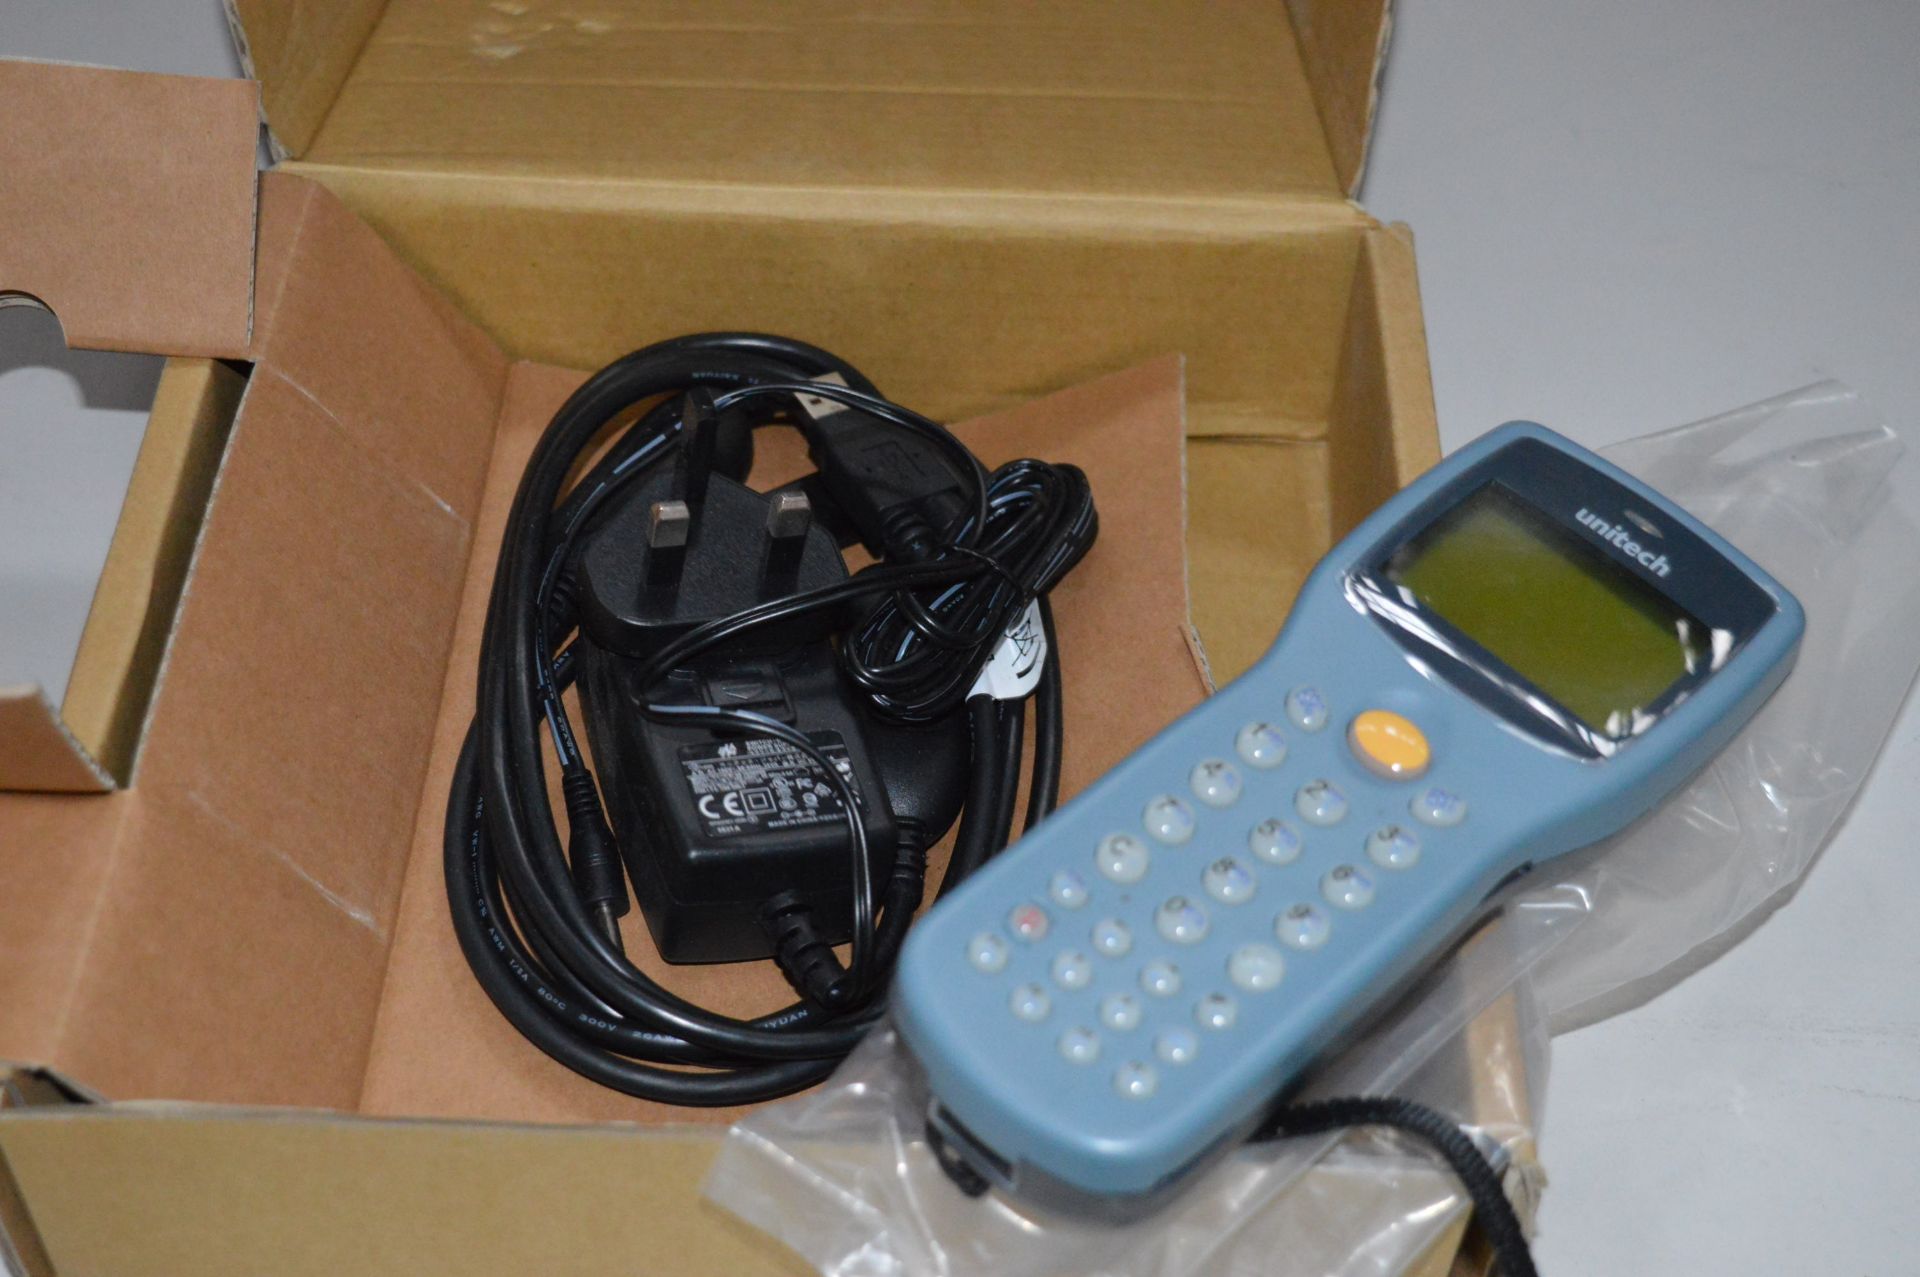 1 x Unitech HT630 Data Terminal Barcode Scanner - RRP £500 - Excellent Condition WITH Box and - Image 3 of 6